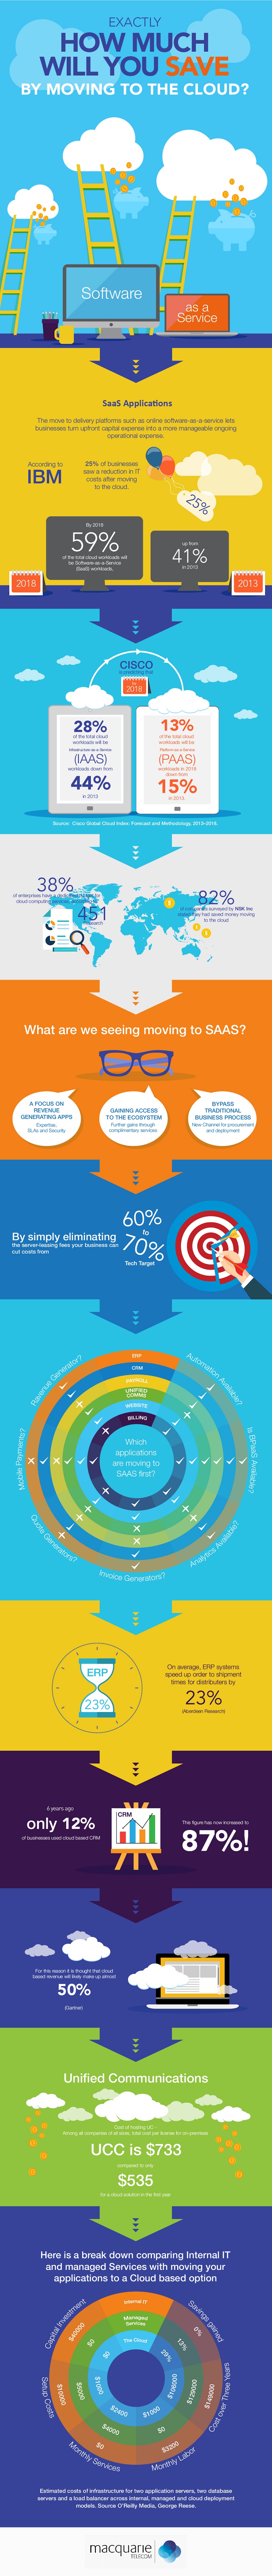 How Much Will You Save by Switching to SaaS? infographic